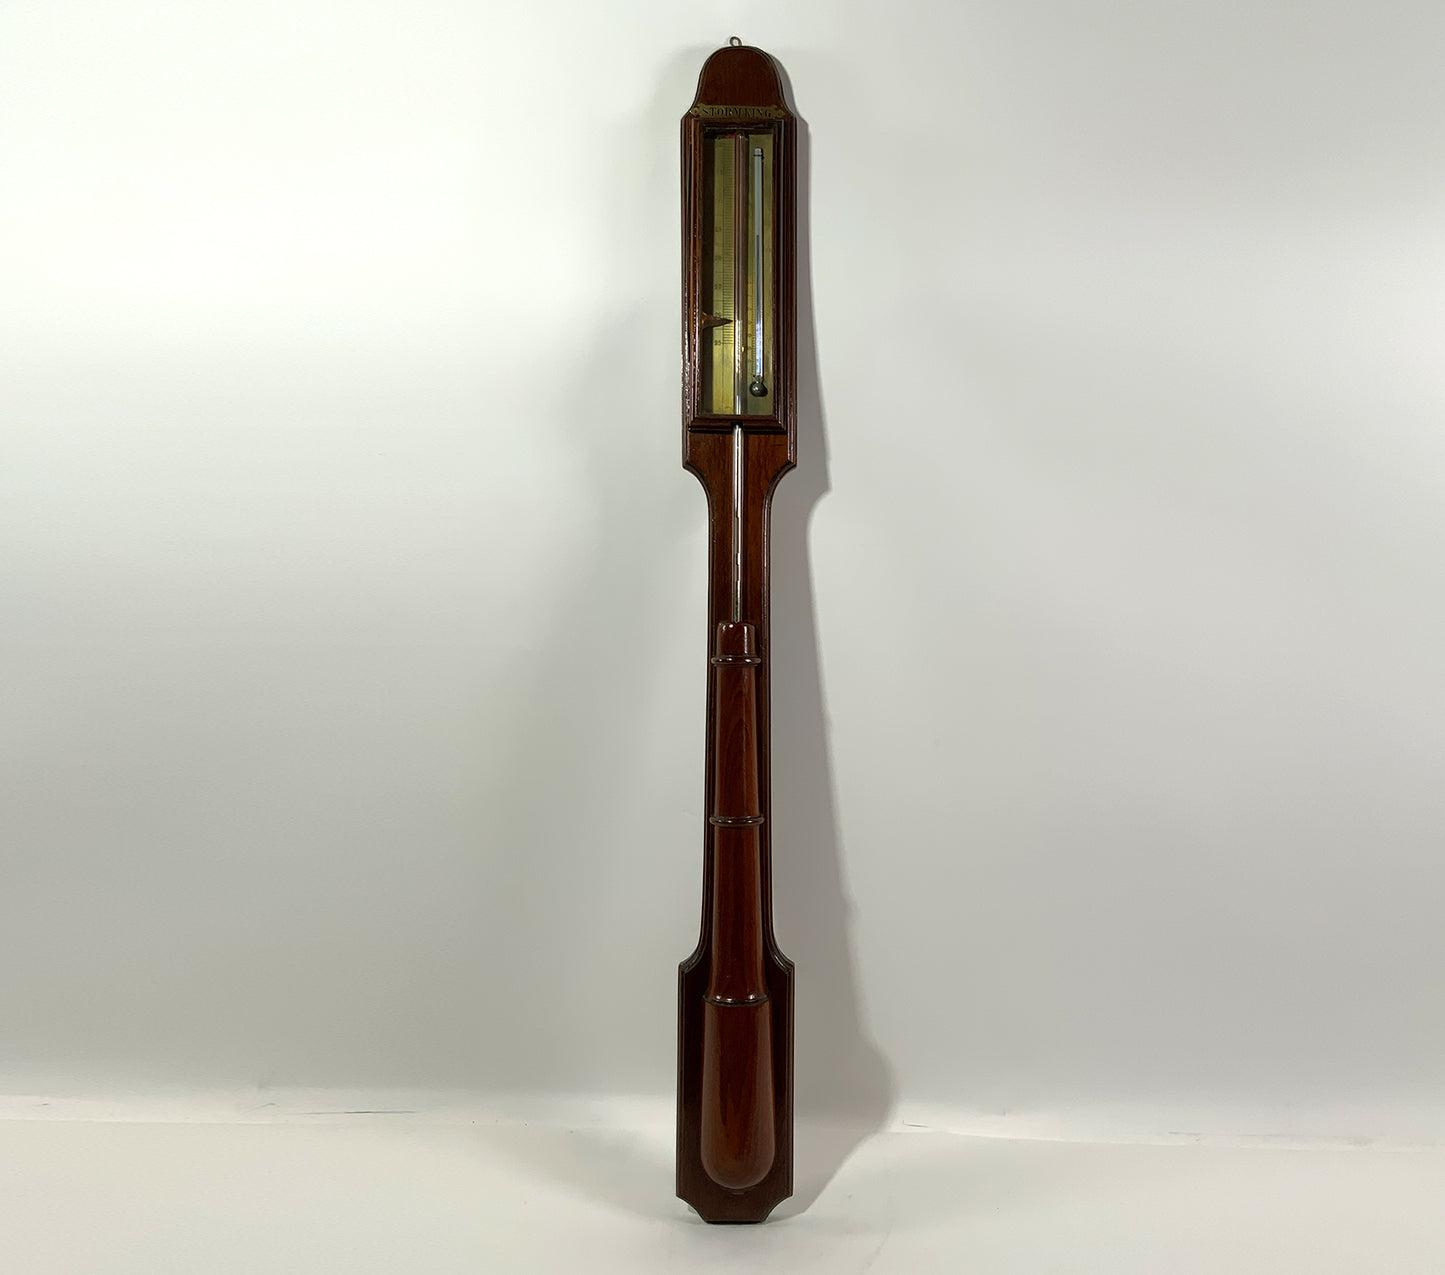 Barometer / Thermometer "Storm King" By E.C. Spooner - Lannan Gallery